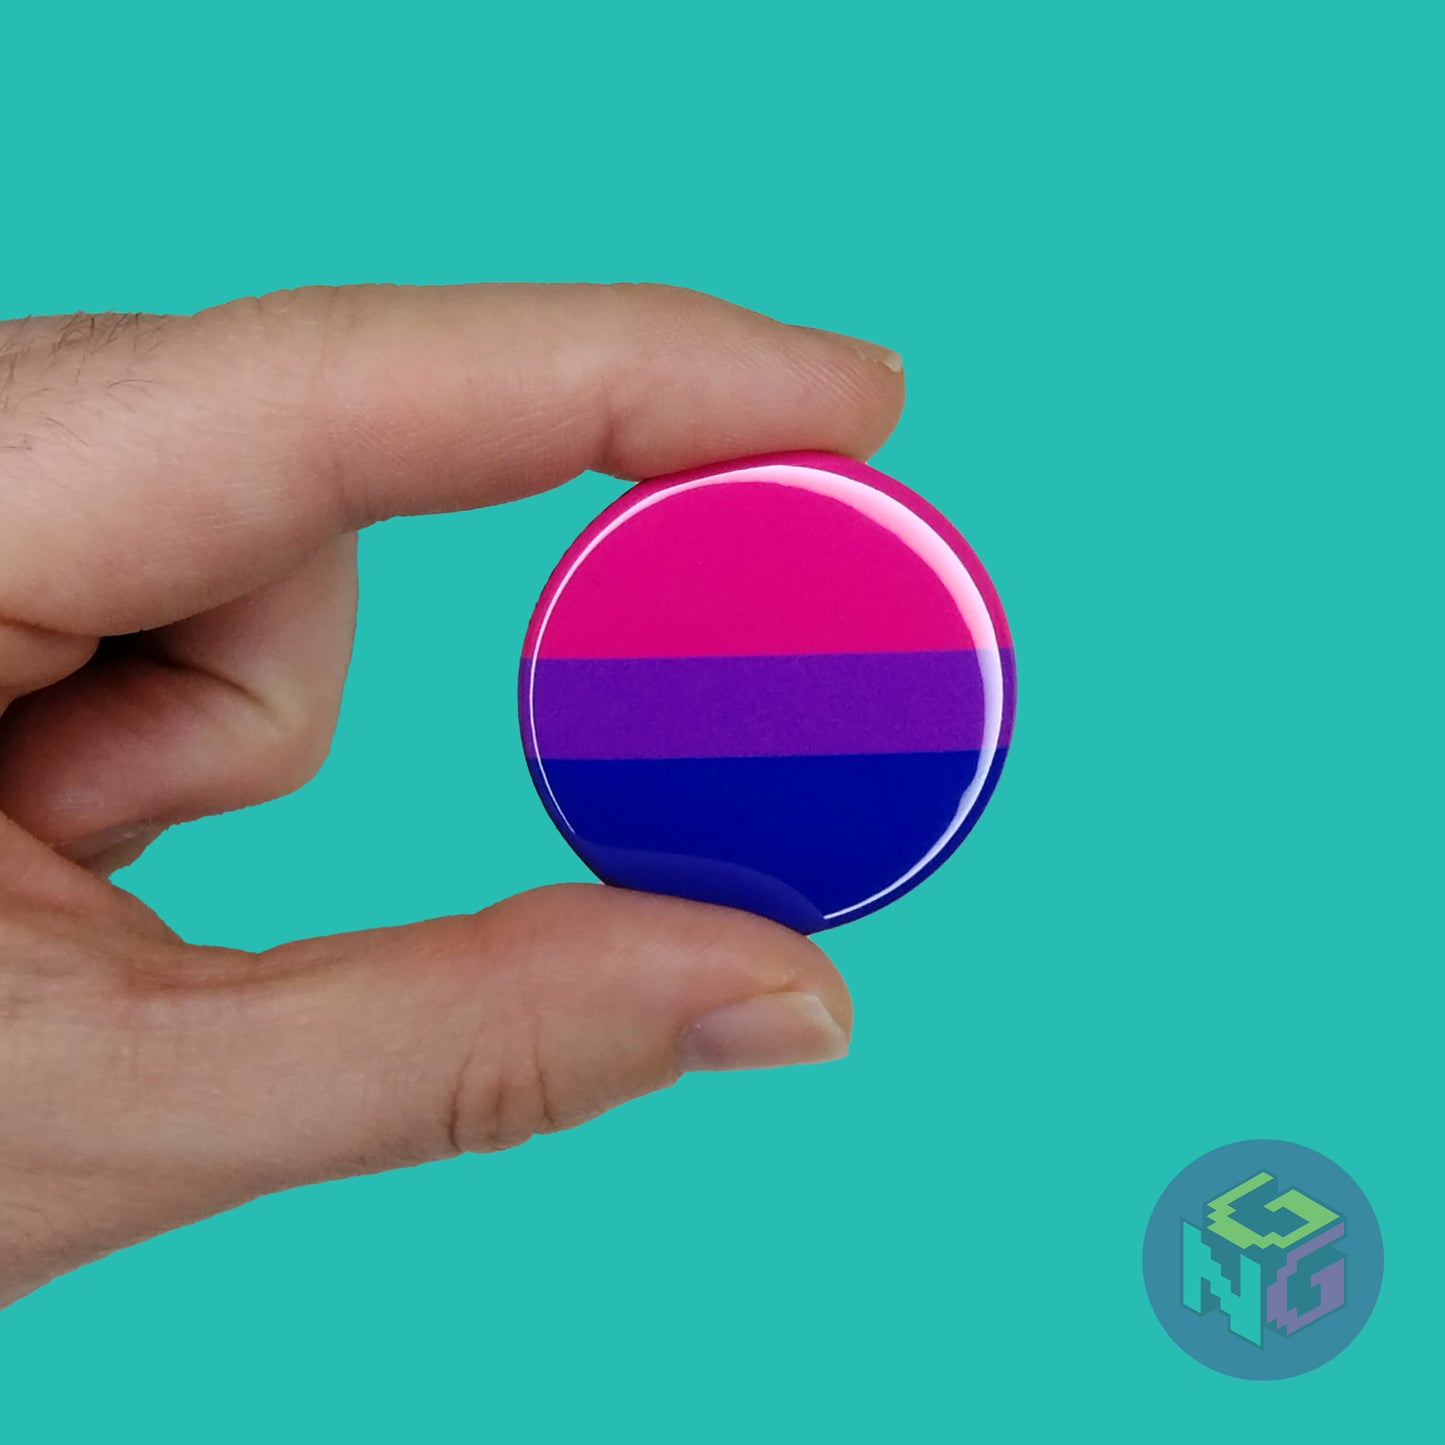 round bisexual pride pin being held by a hand in front of a mint background